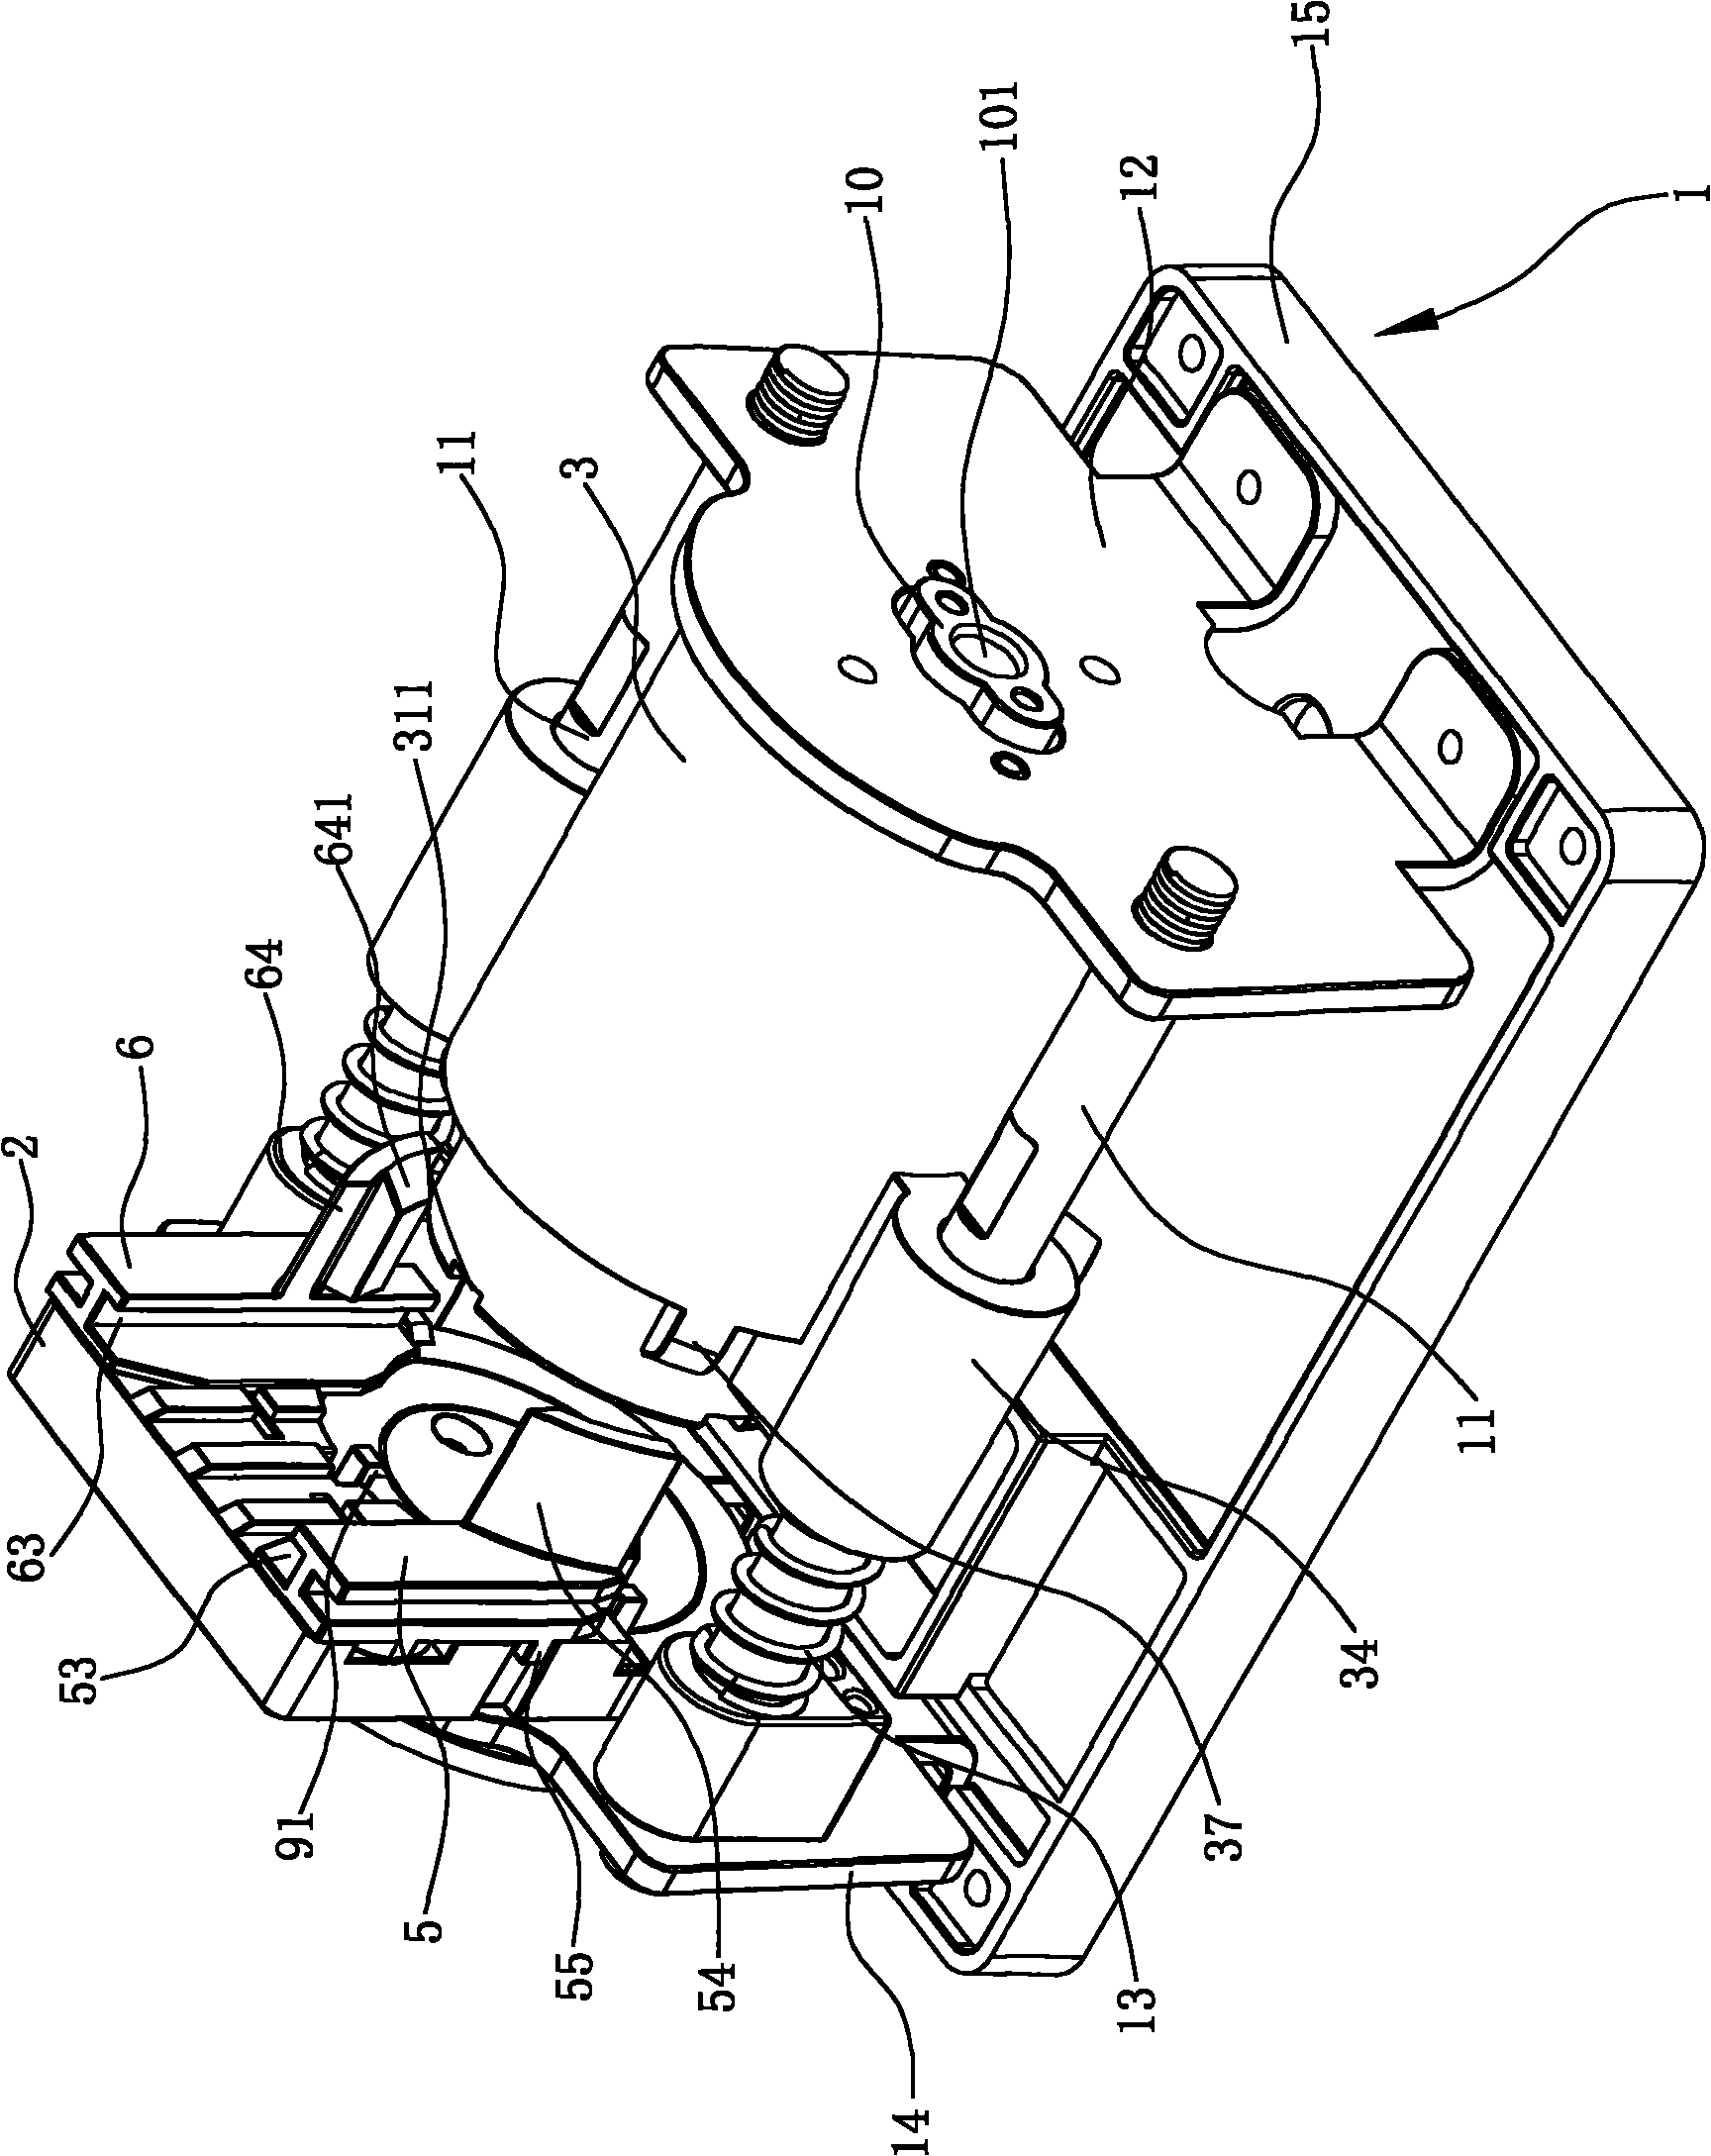 Packet sending and falling structure of beverage brewing device